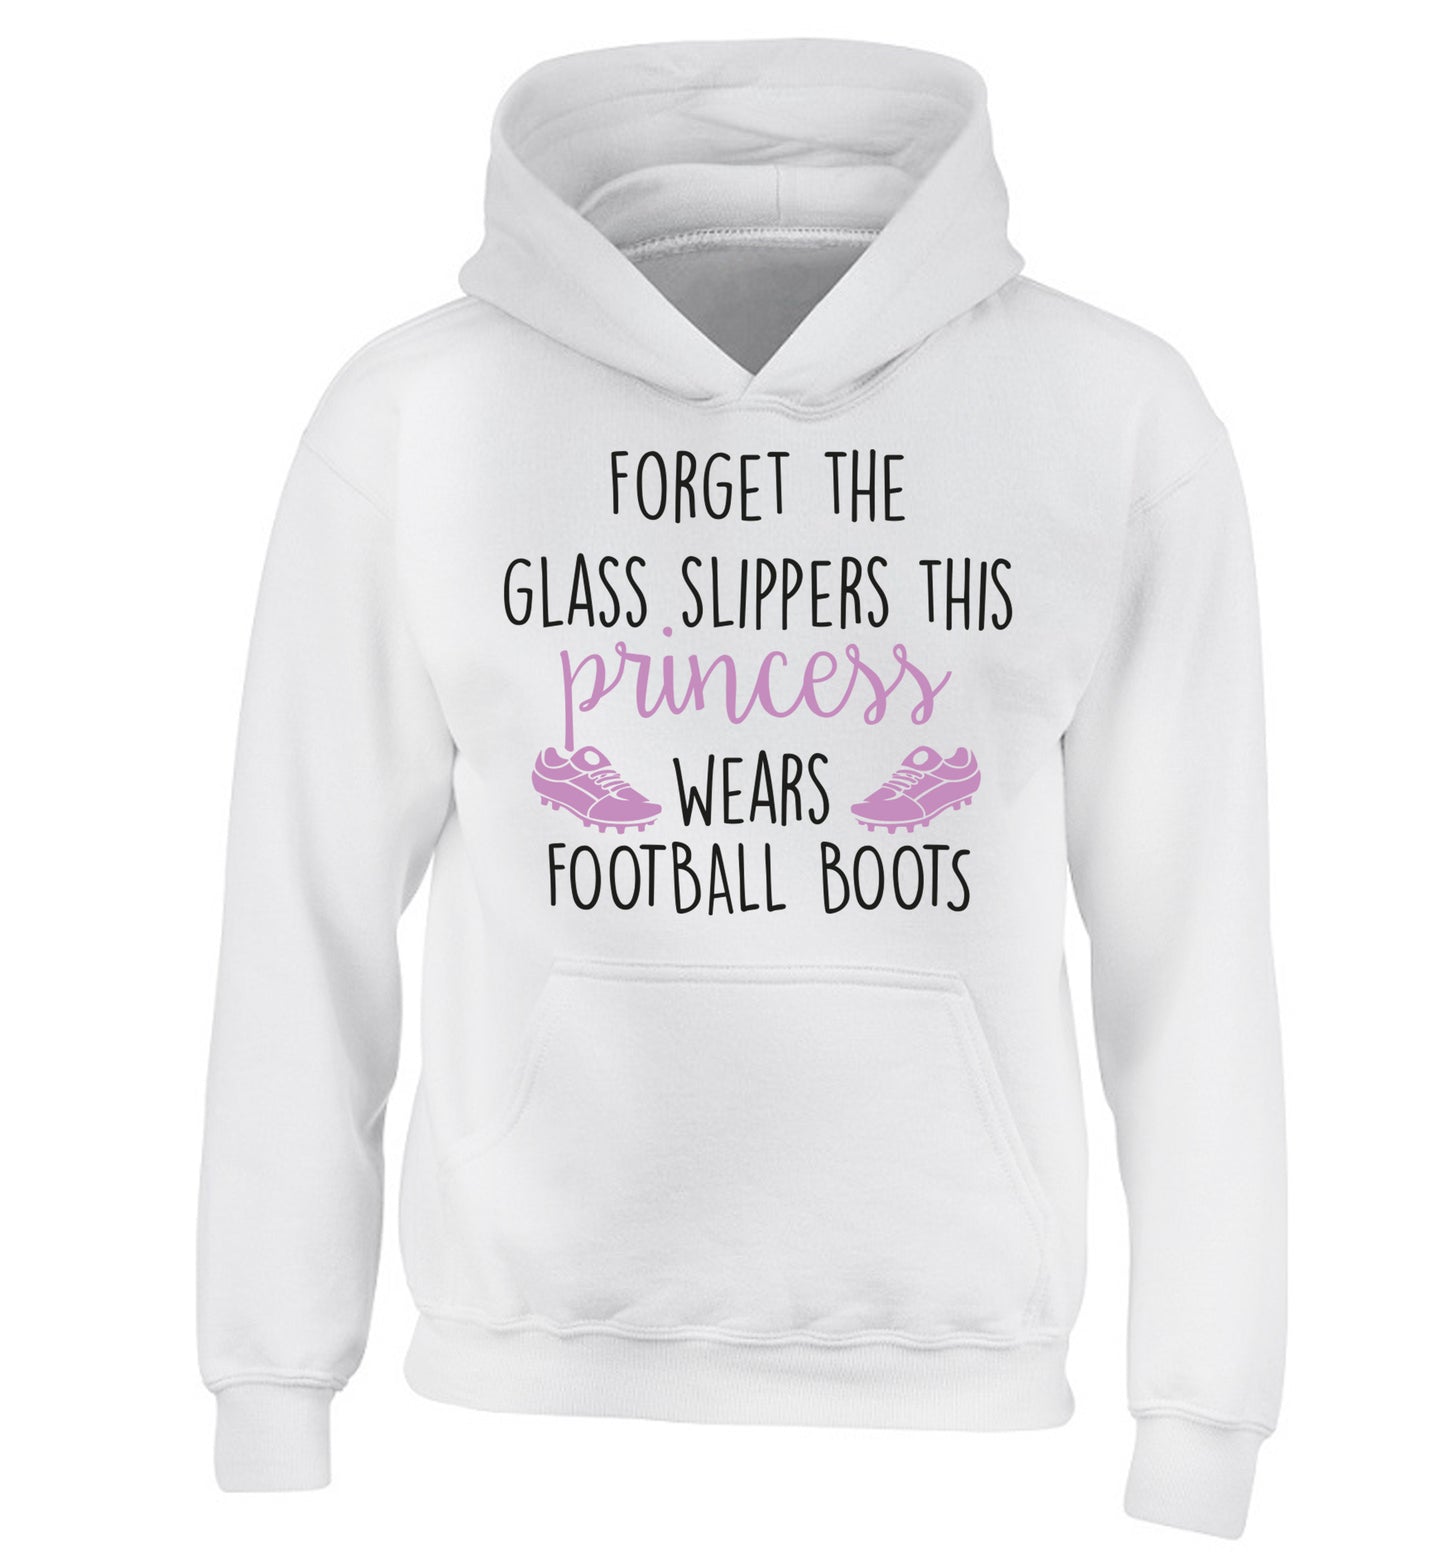 Forget the glass slippers this princess wears football boots children's white hoodie 12-14 Years